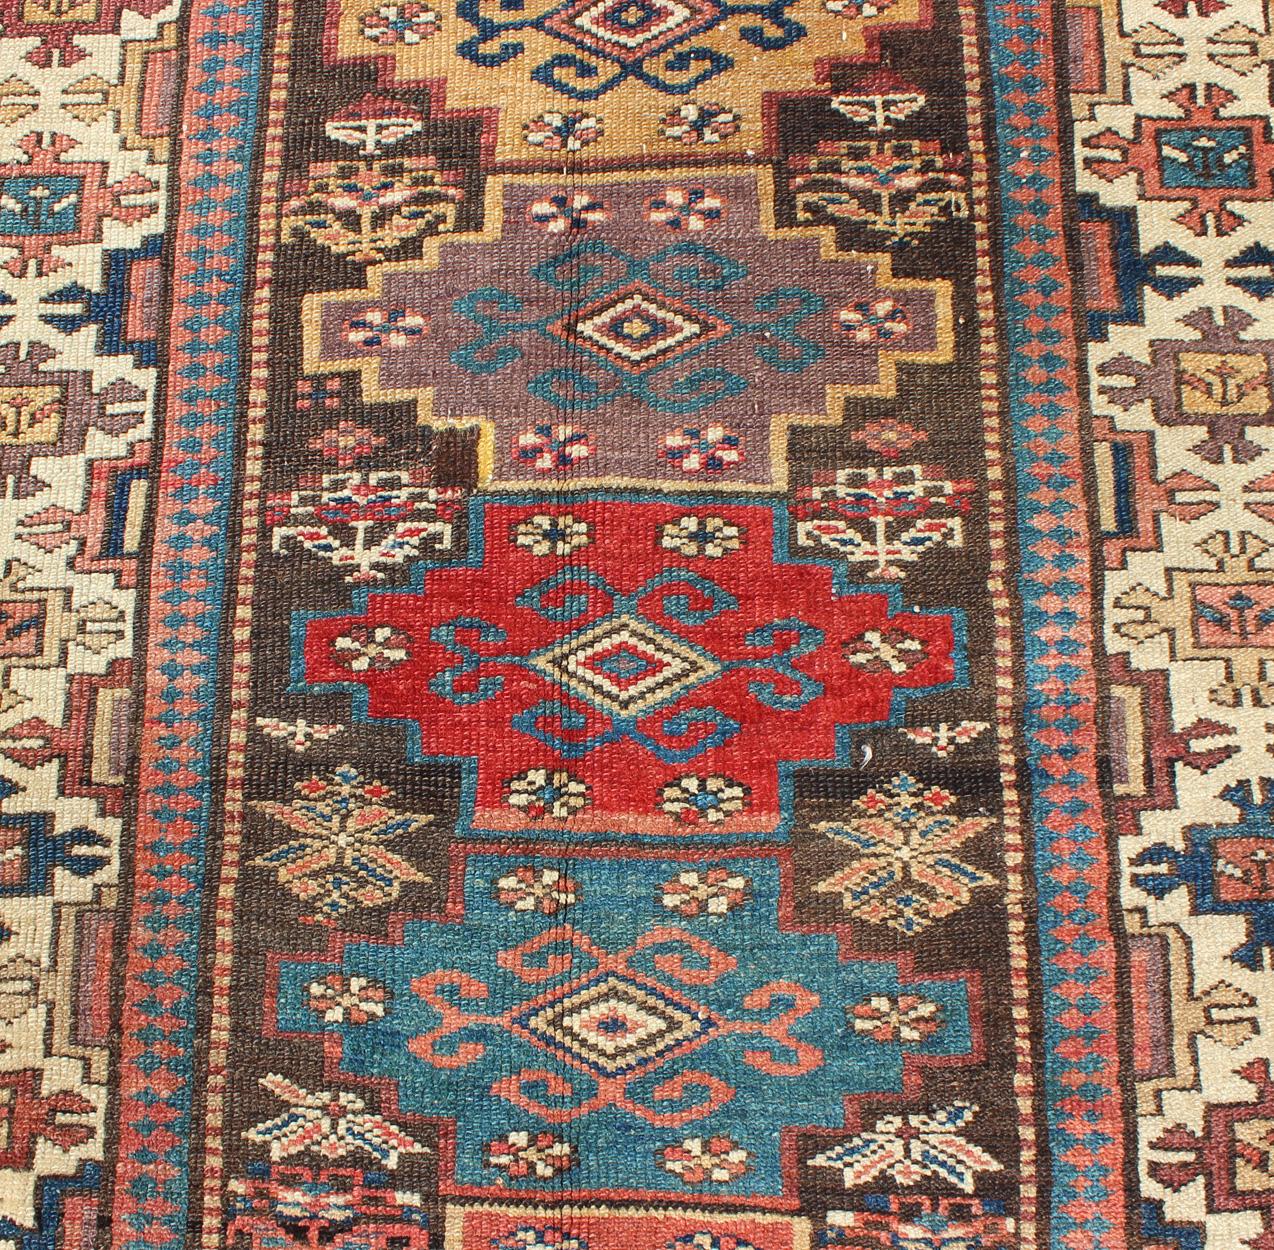 Antique N.W. Persian Gallery Rug in Jewel Tones with Diamond Geometric Motifs In Good Condition For Sale In Atlanta, GA